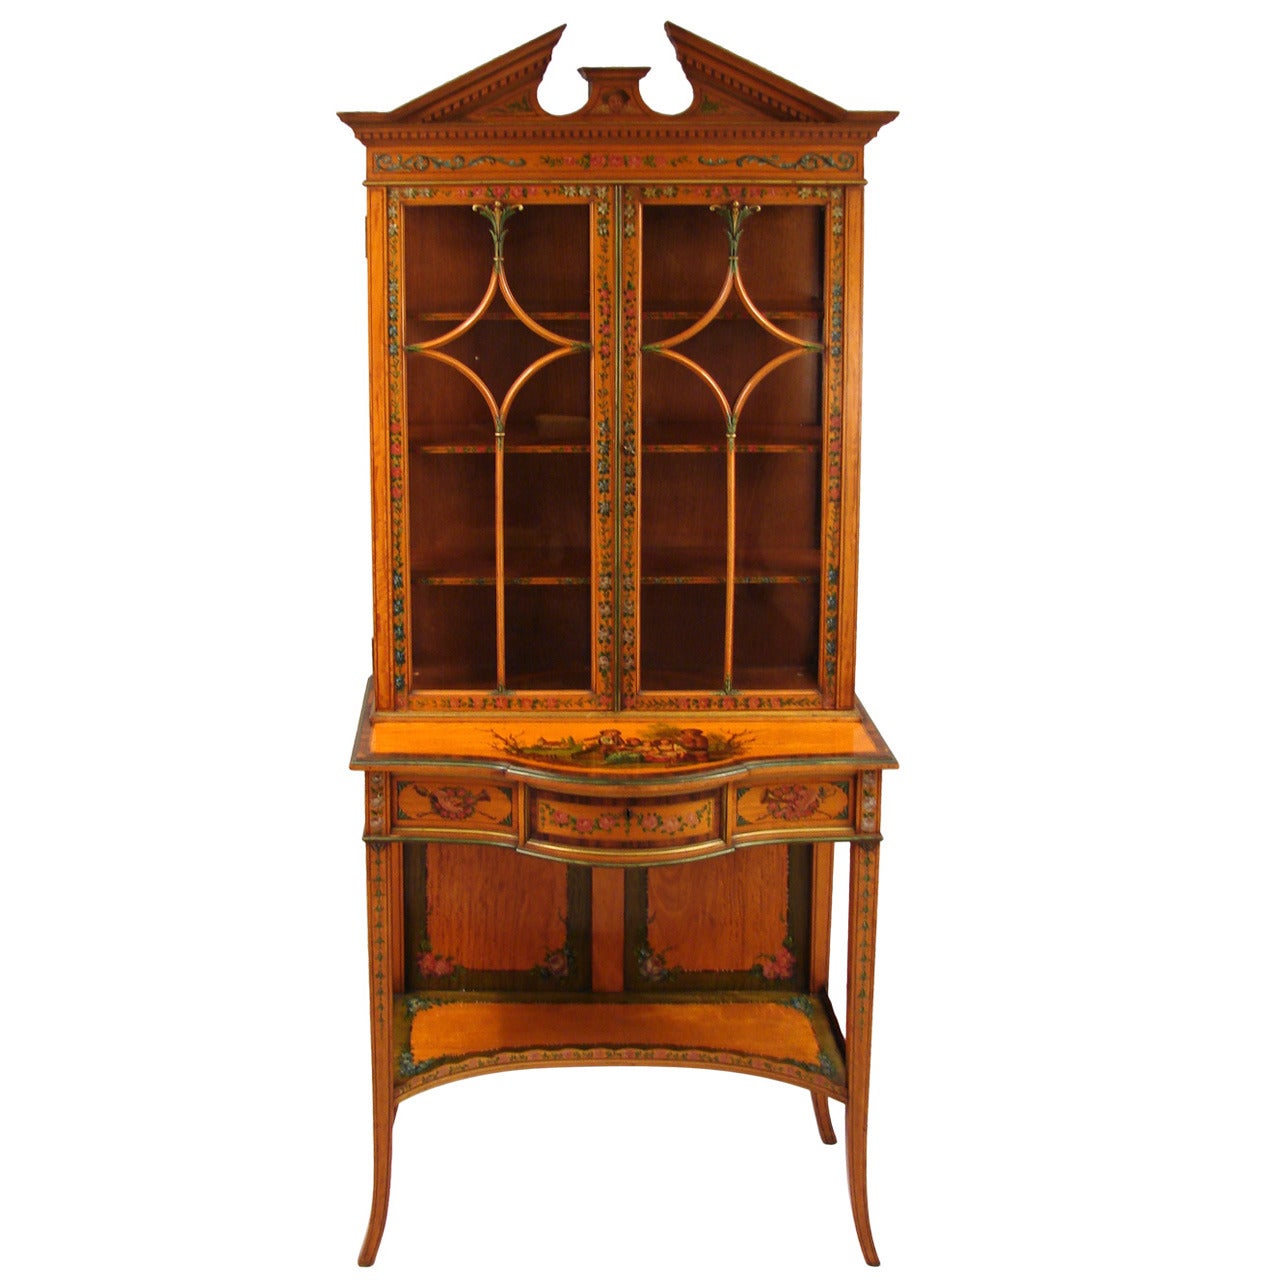 FIne Quality English Painted Satinwood Cabinet on Stand